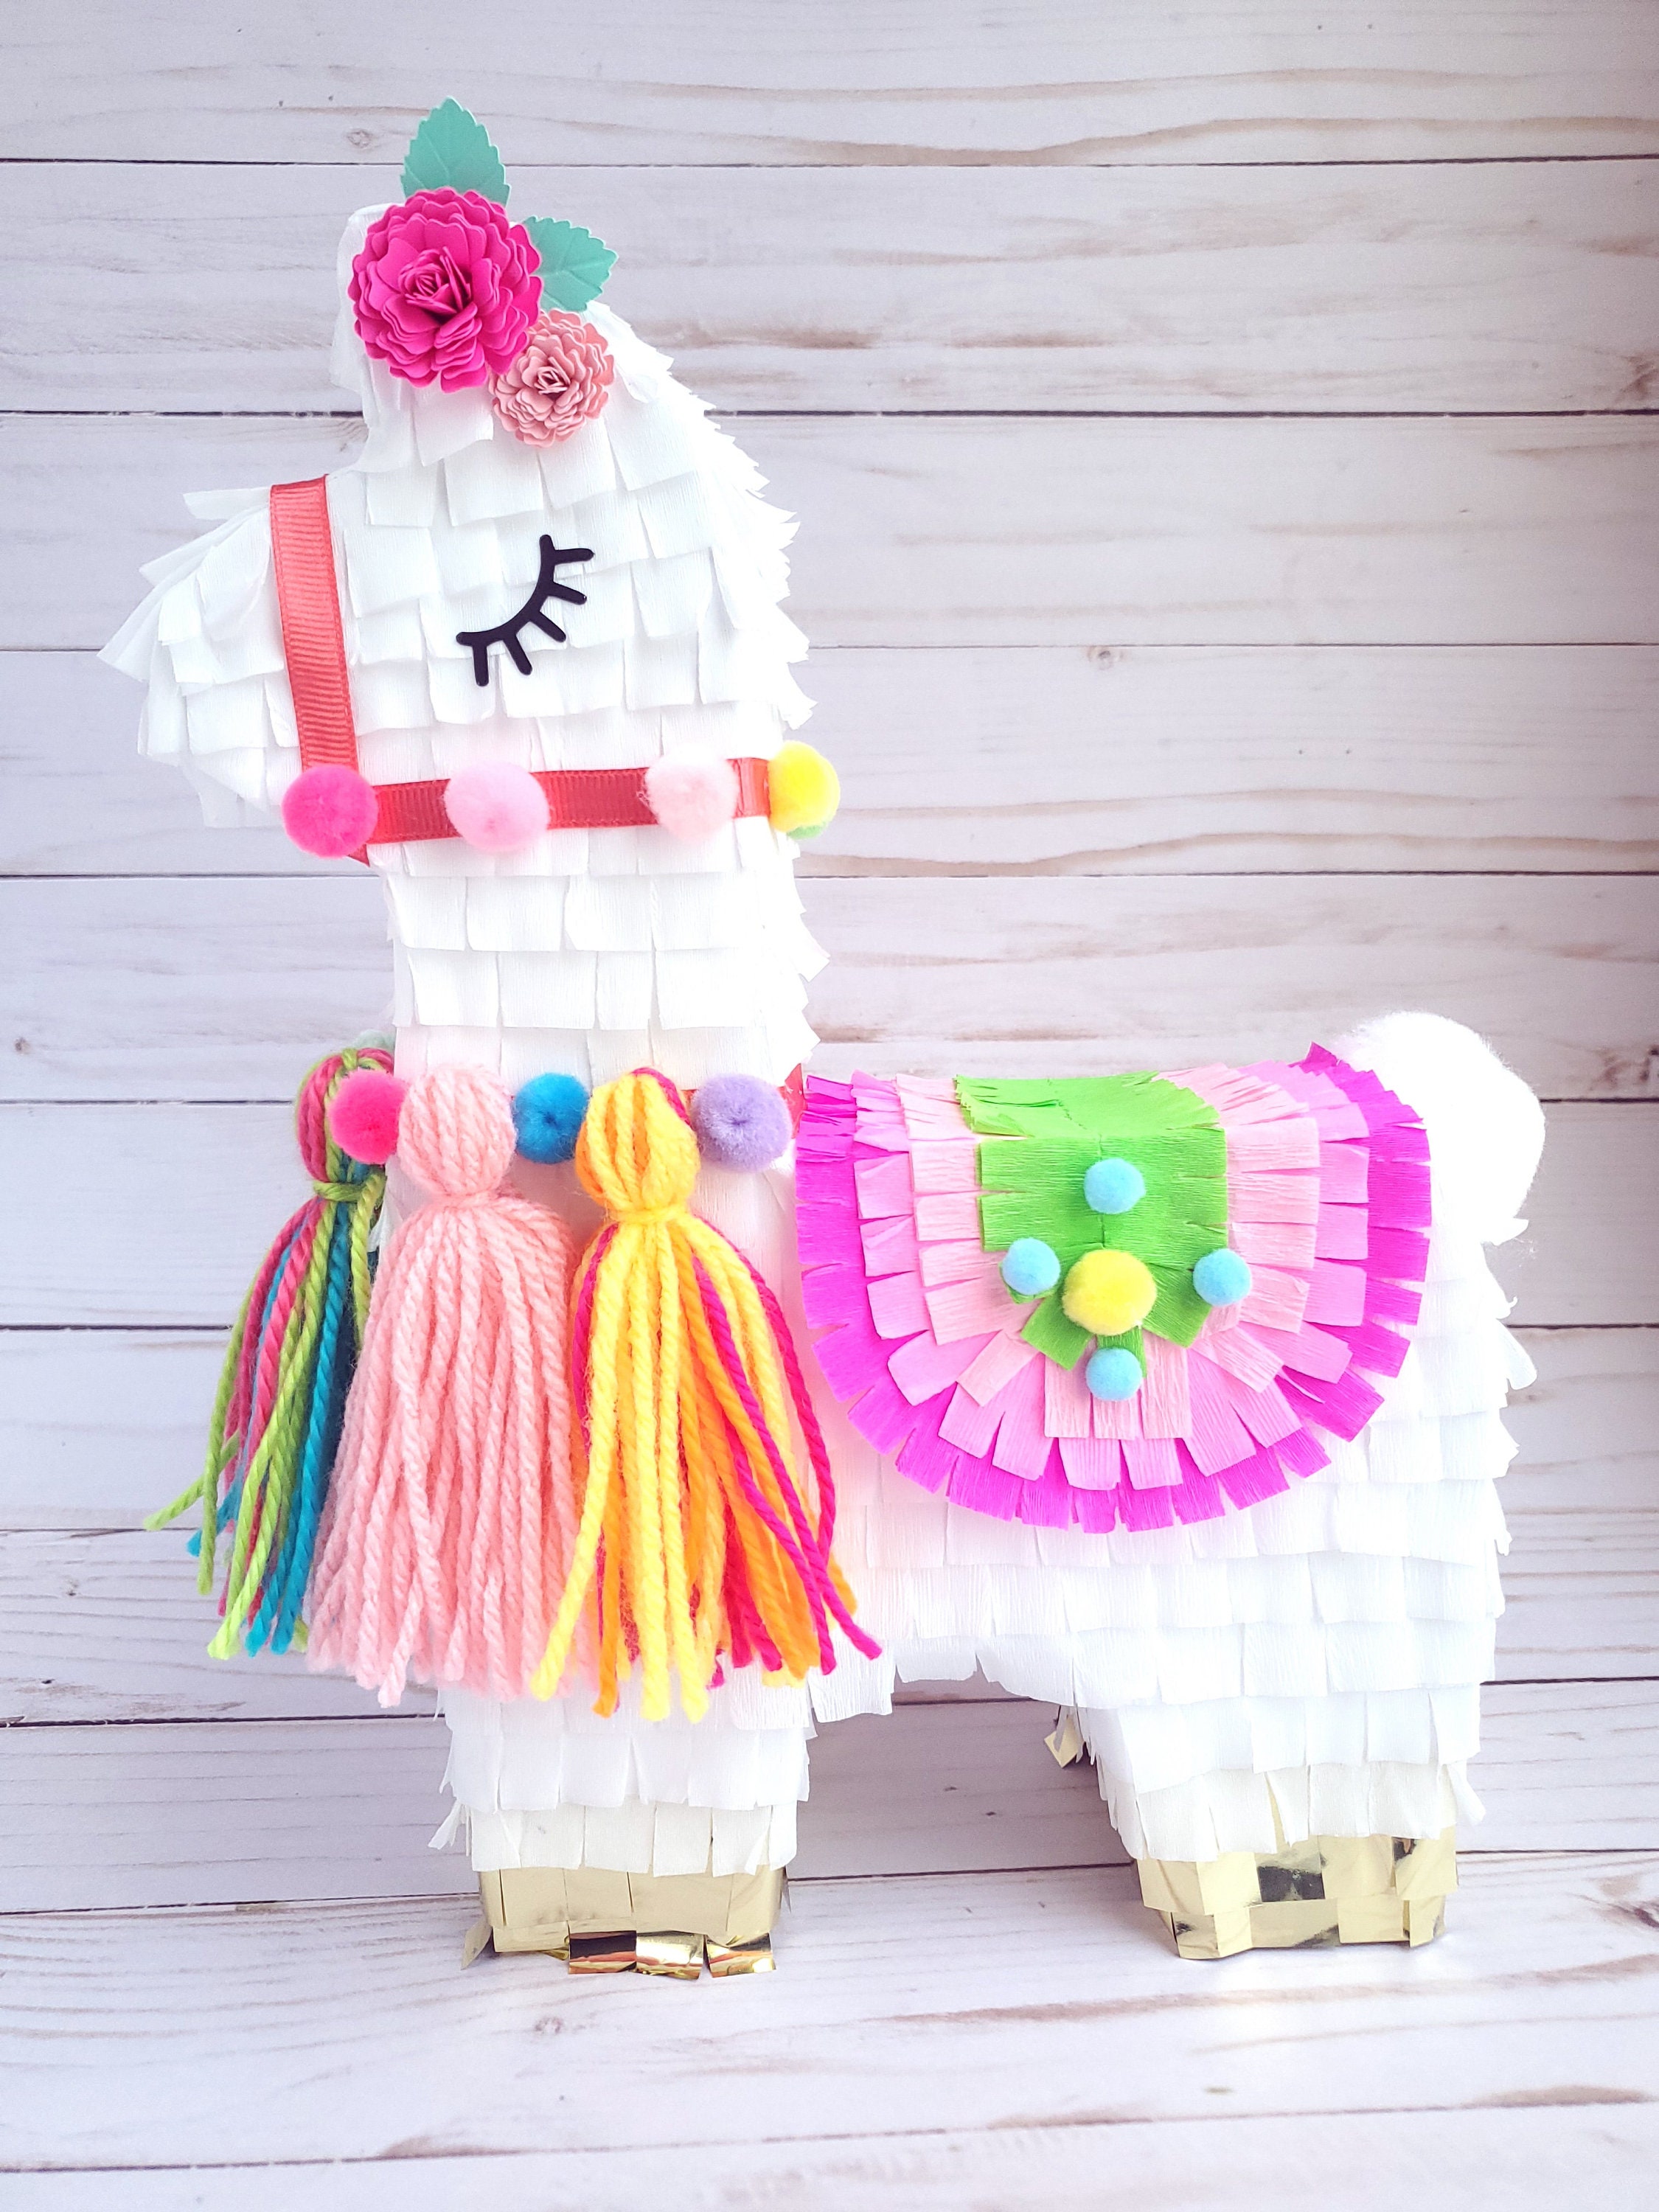 Sparkle and Bash Llama Pinata for Fiesta Party Supplies, Small Llama Party  Decorations for Kids, Boys, Girls Birthday (White, 8.5x15x4.5 in)